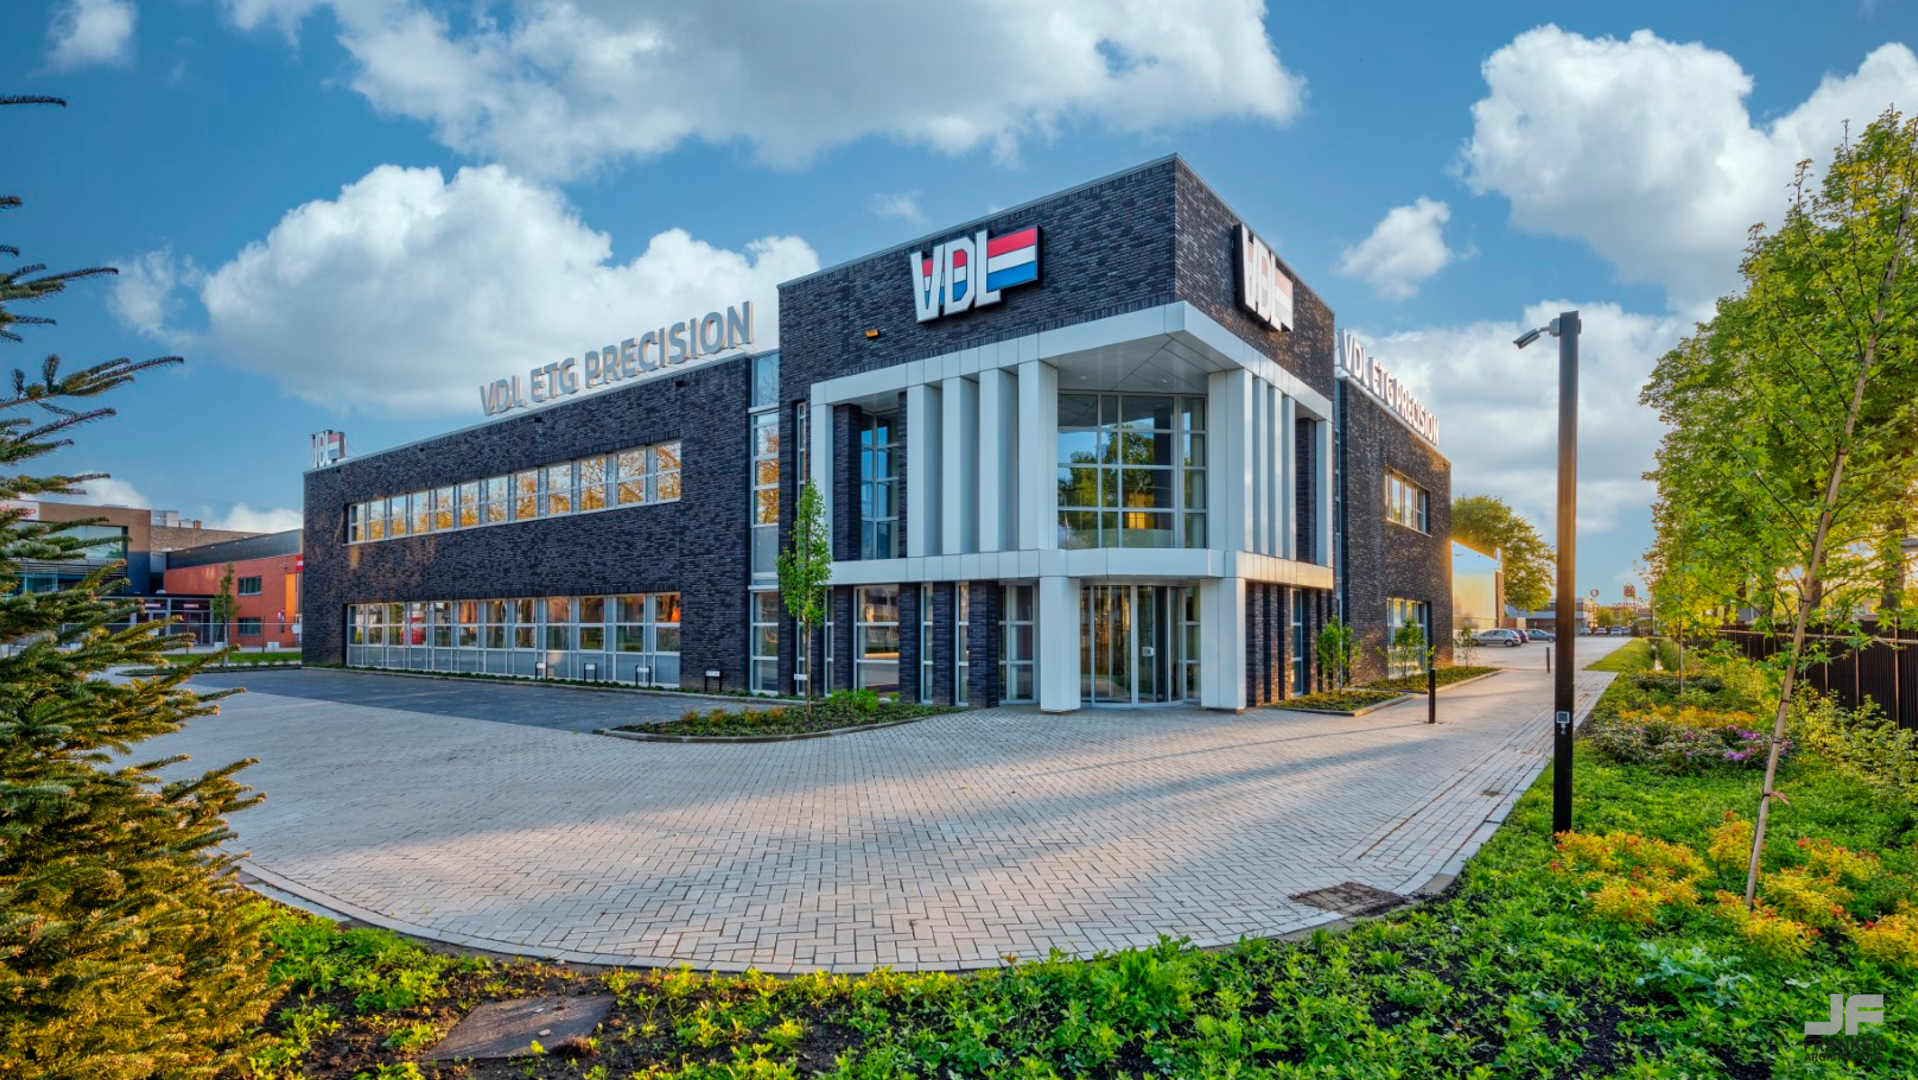 Dutch high tech firm VDL to build a new semiconductor factory in Vietnam